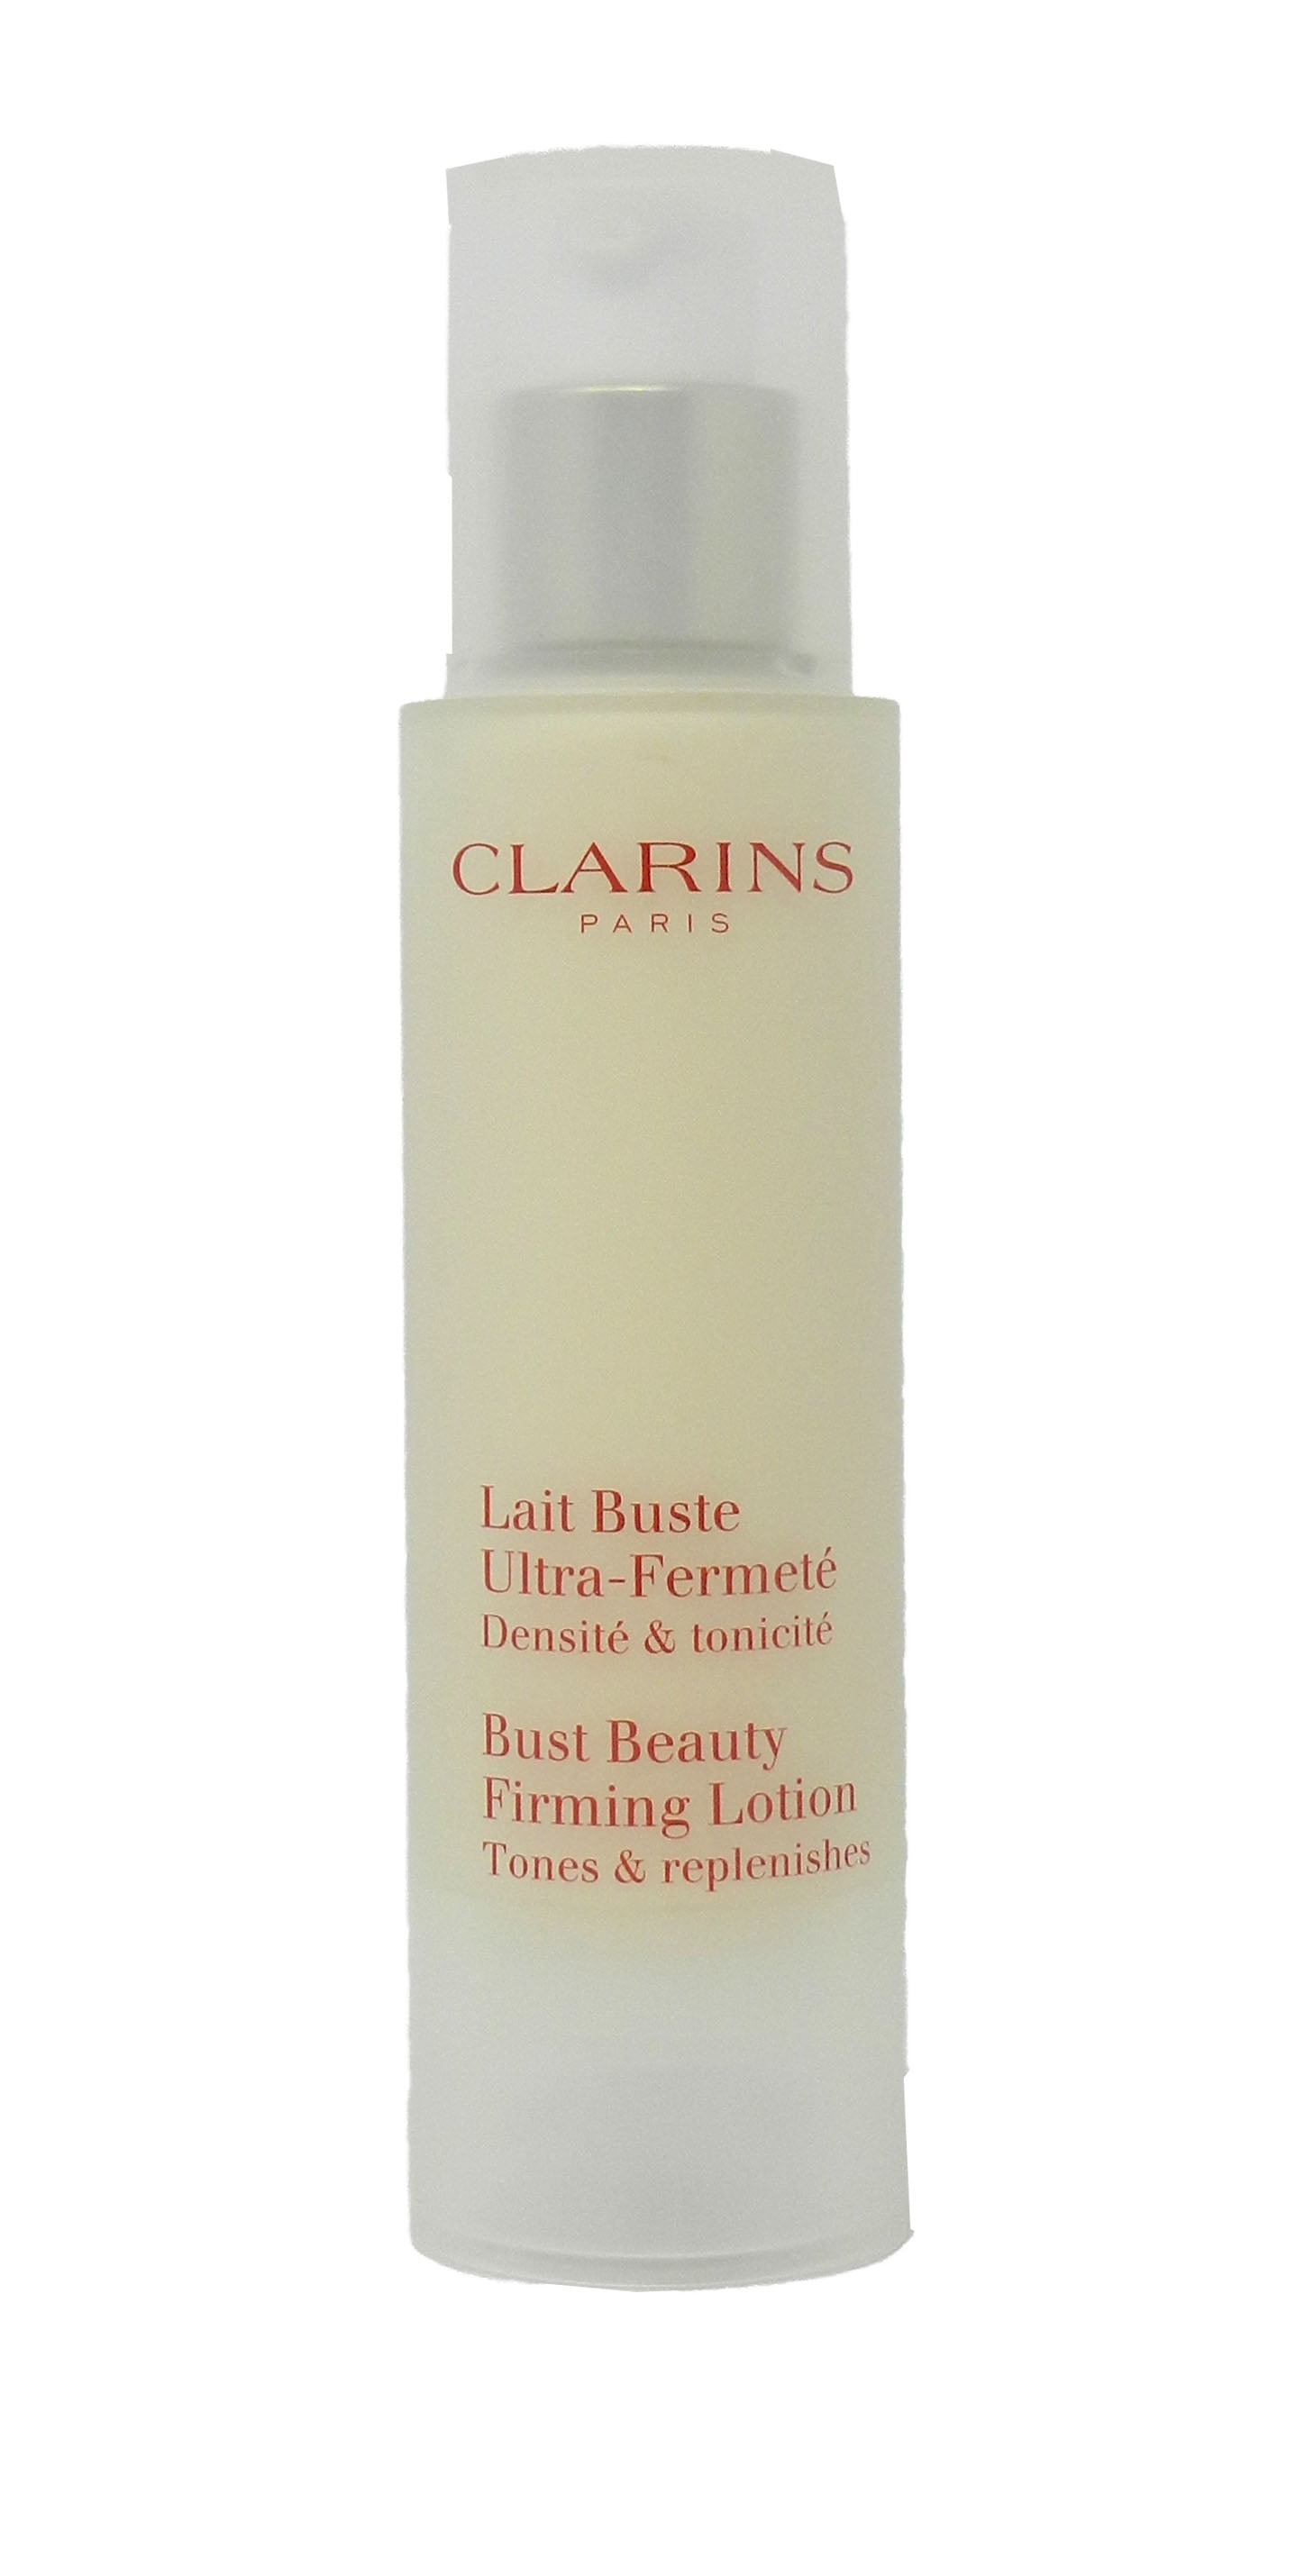 Clarins Bust Beauty Firming Lotion, 1.7 Oz -